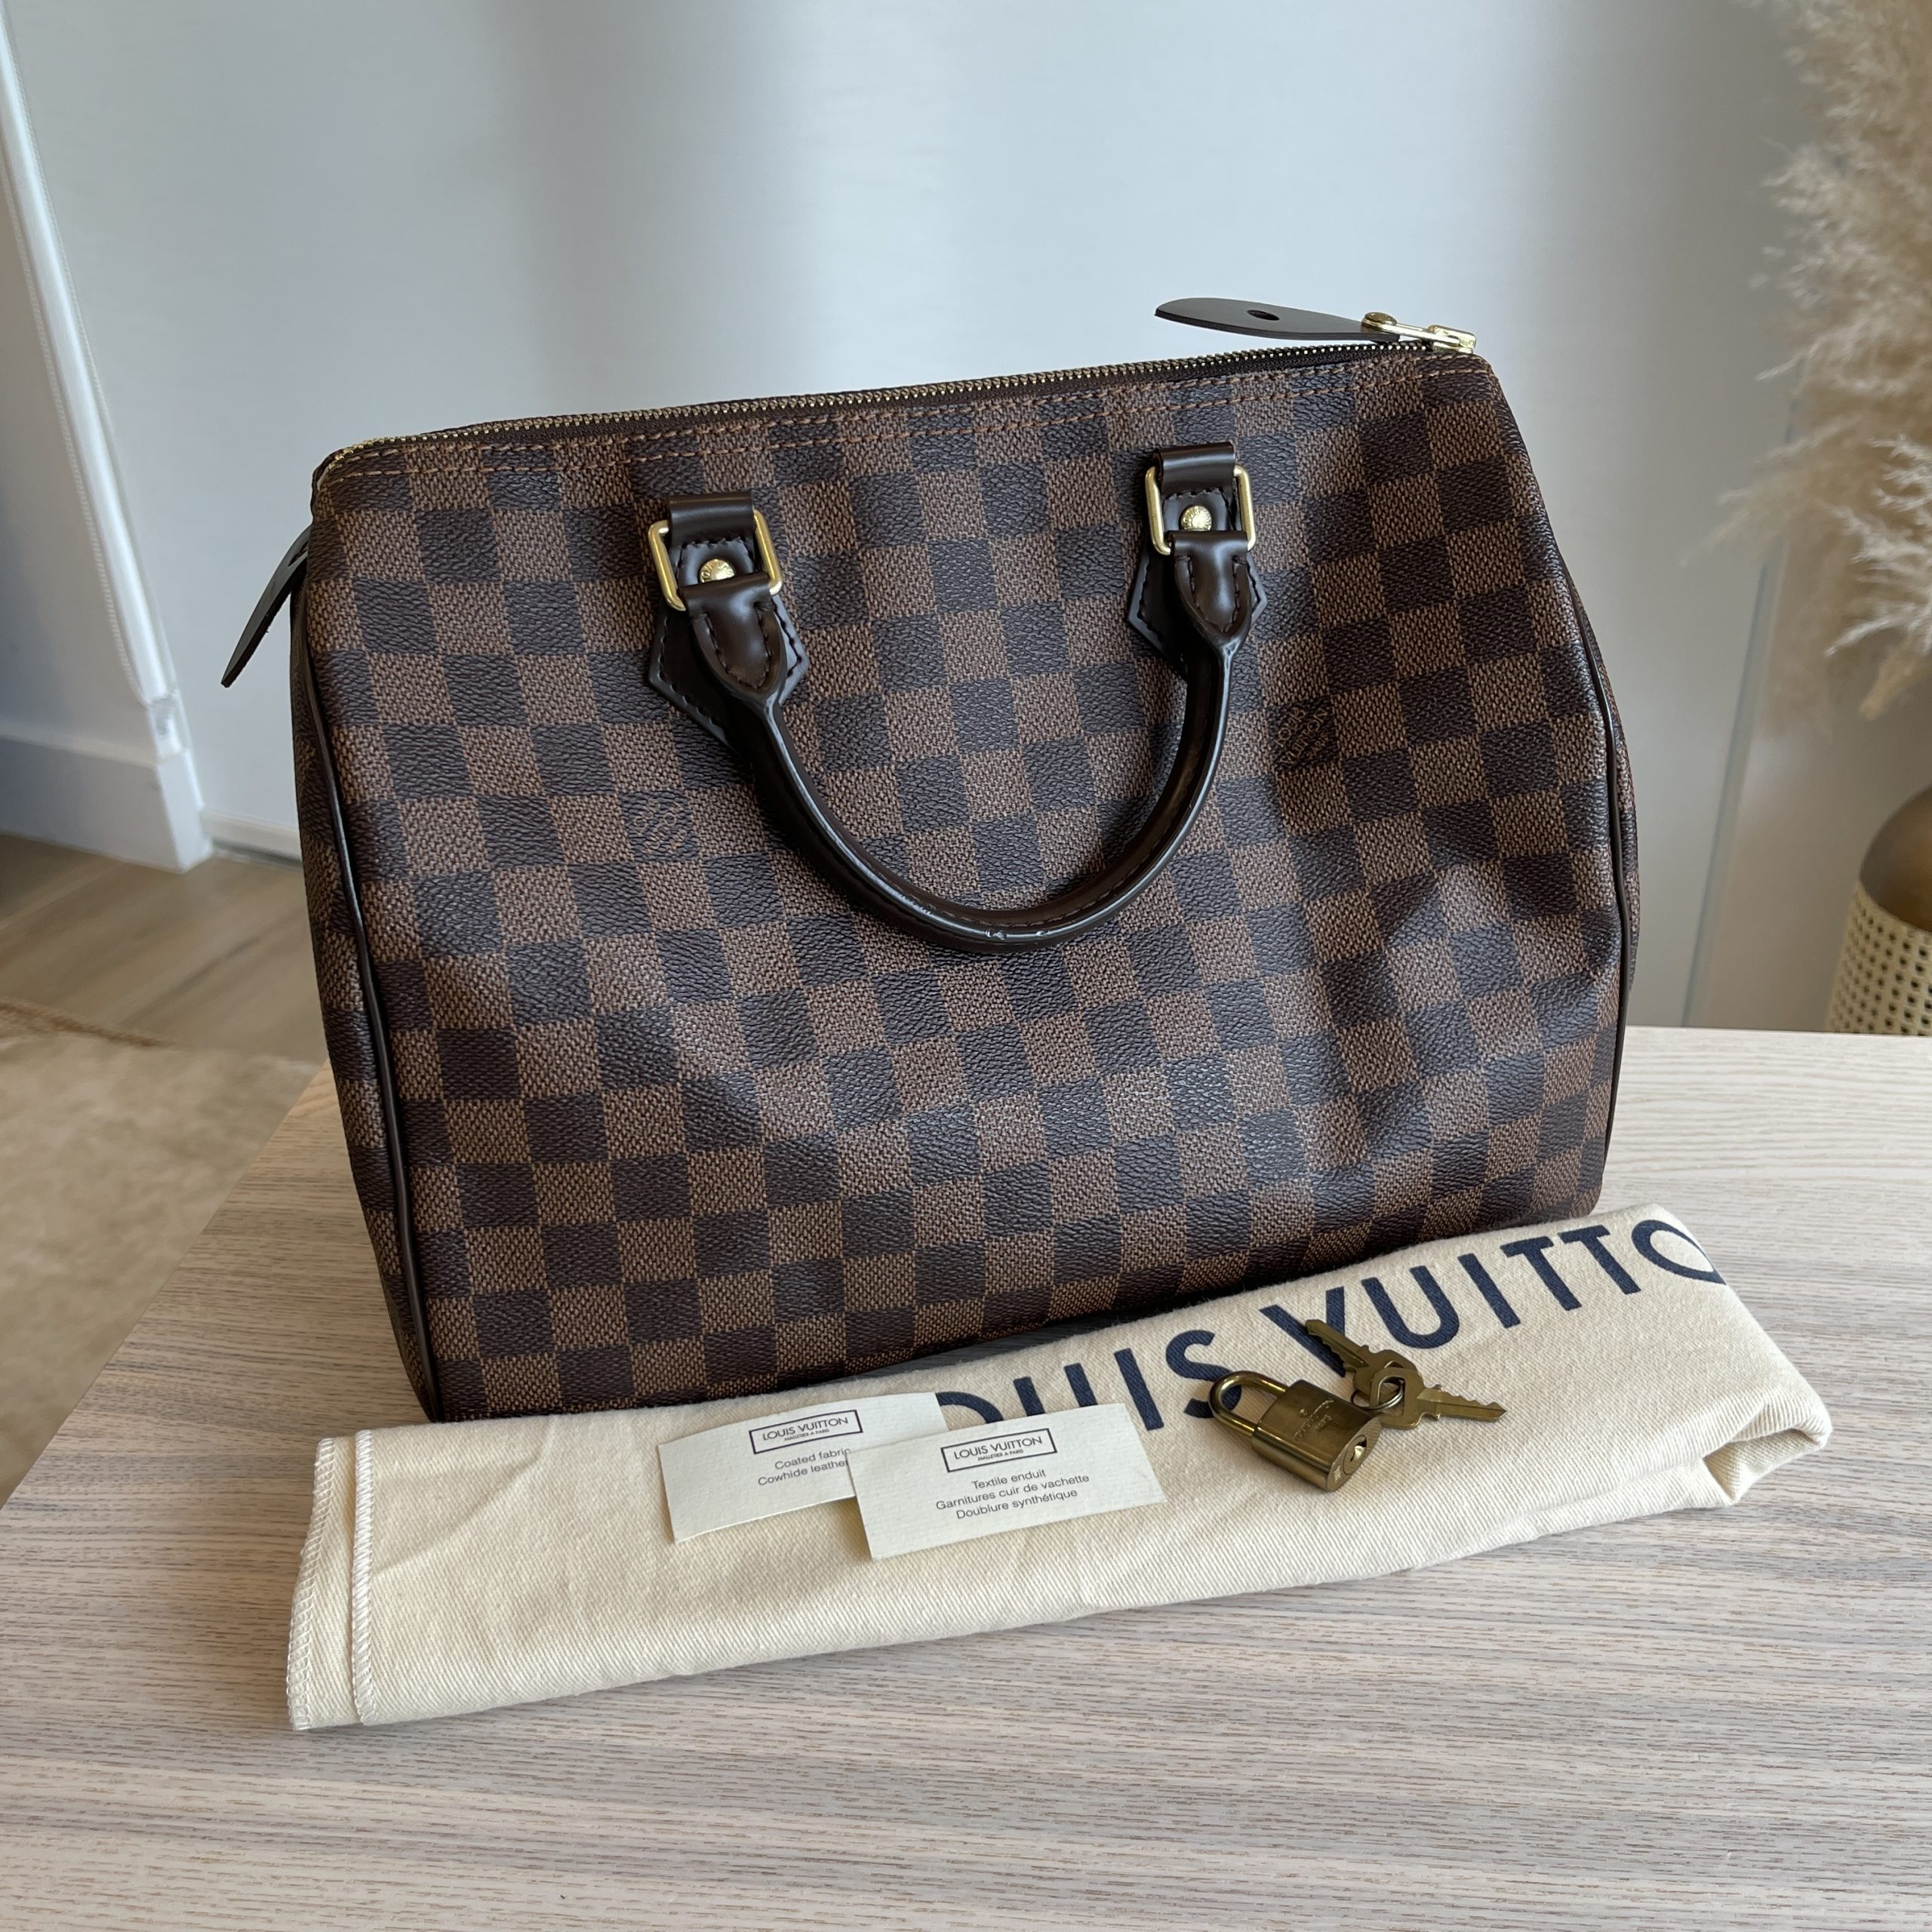 LV brera damier ebene handbag😍😍 in very good condition rank A 2300  dirhams Open for layaway✓ Clean inside and out, no discoloration #brera  #lvbrera, By RS Authentic Items